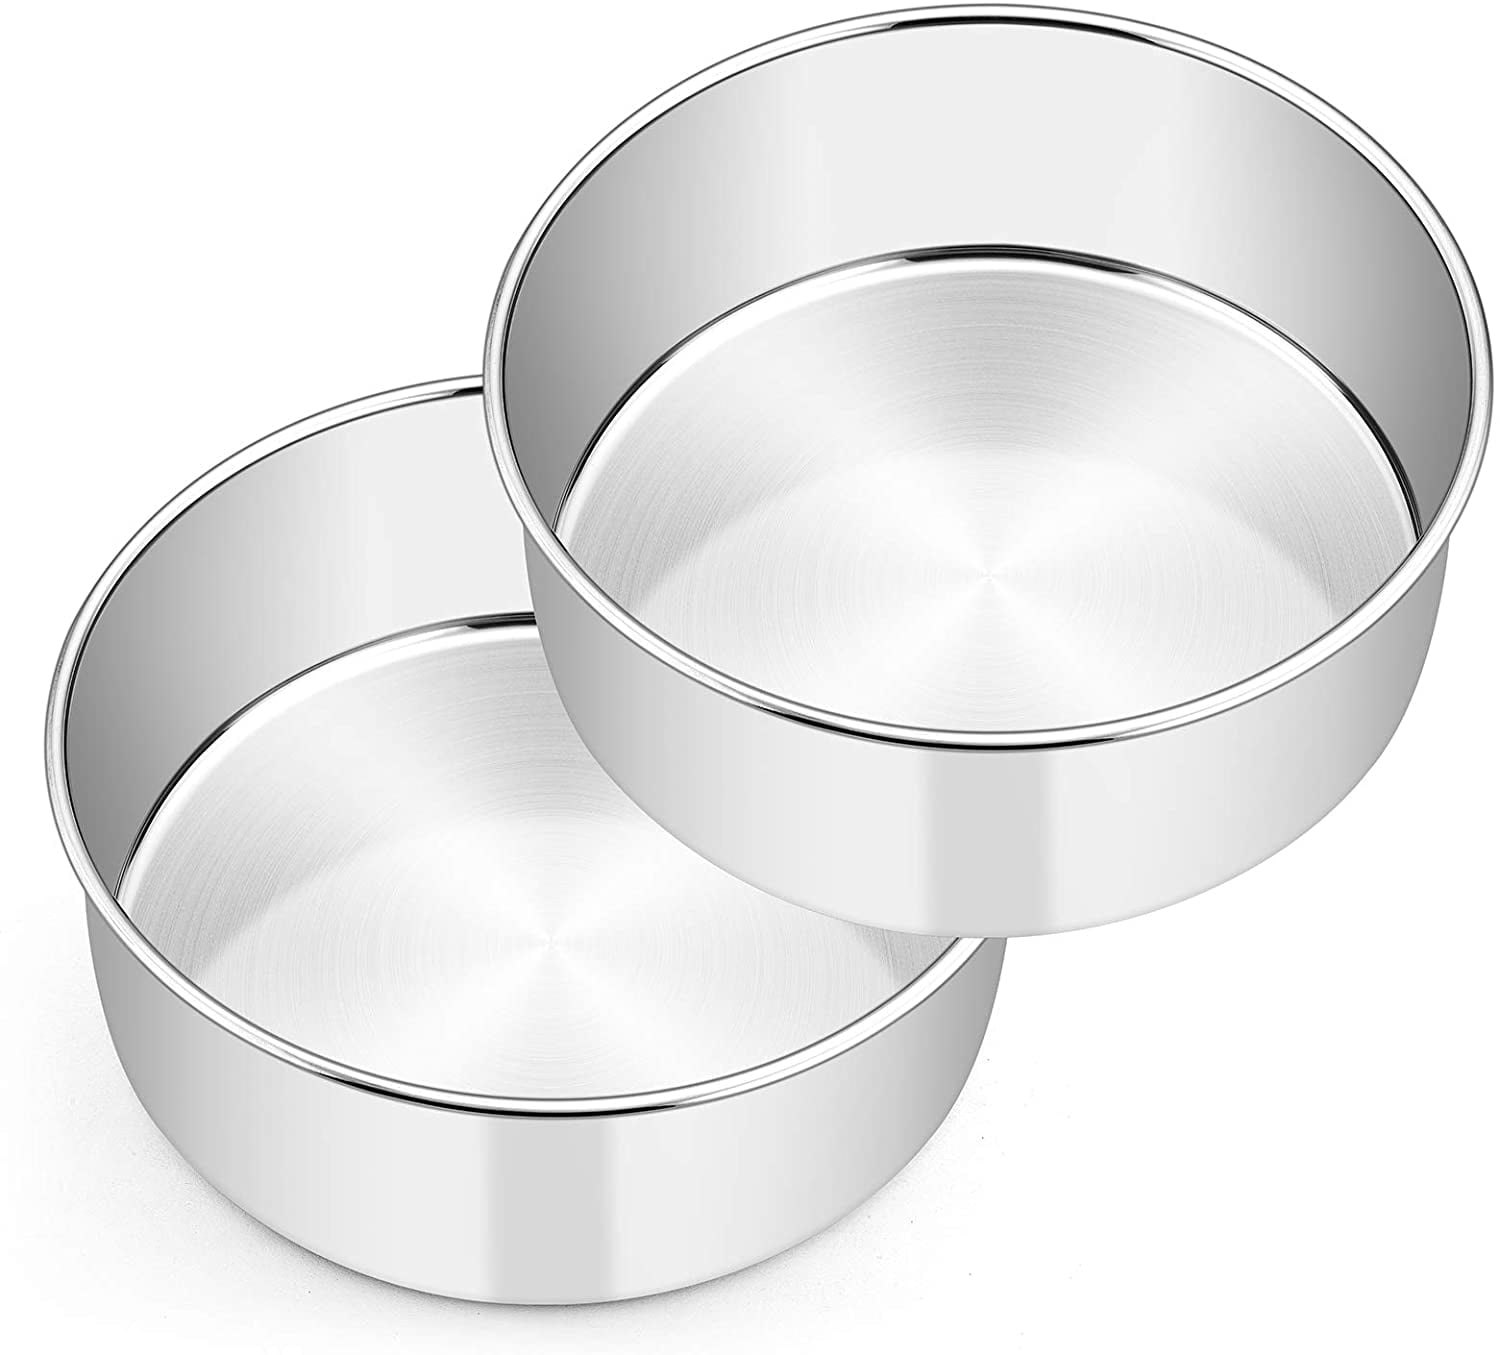 6 Inch Cake Pan PP CHEF 4-Piece Stainless Steel Round Baking Pans Layer Cake P 